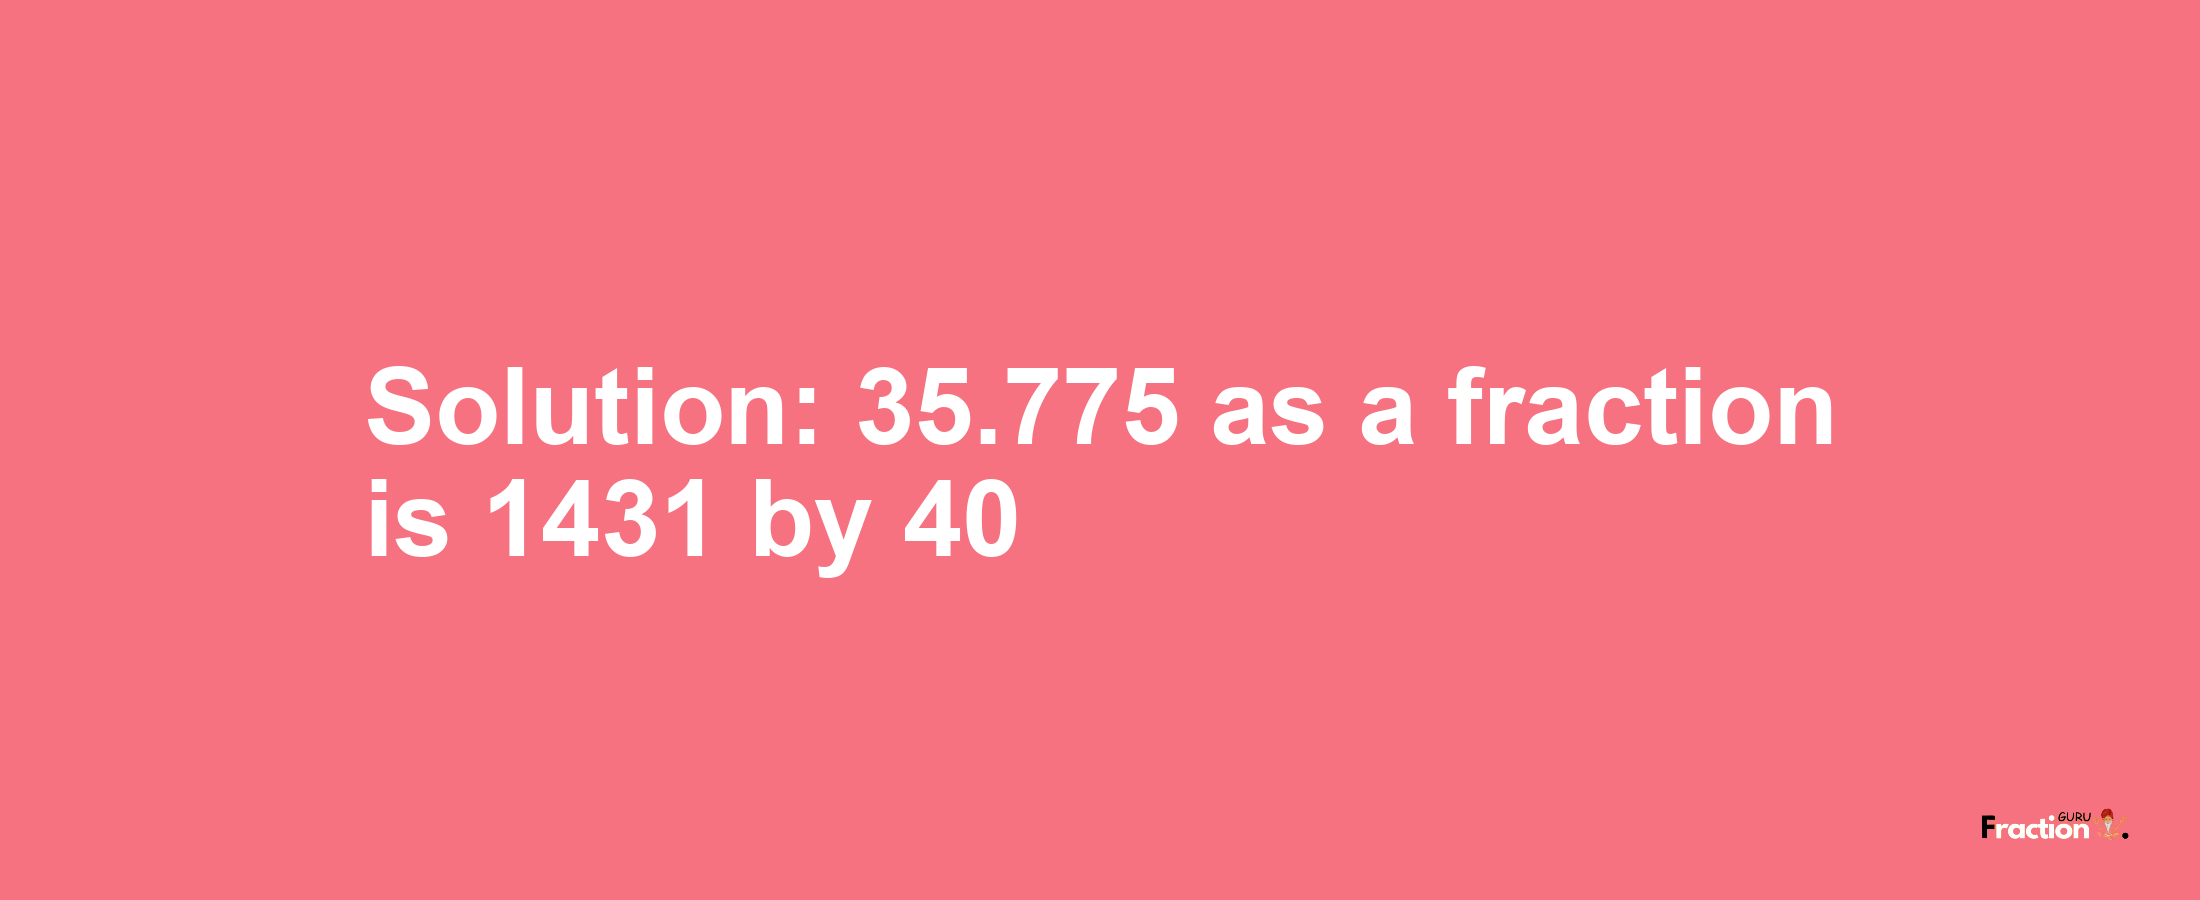 Solution:35.775 as a fraction is 1431/40